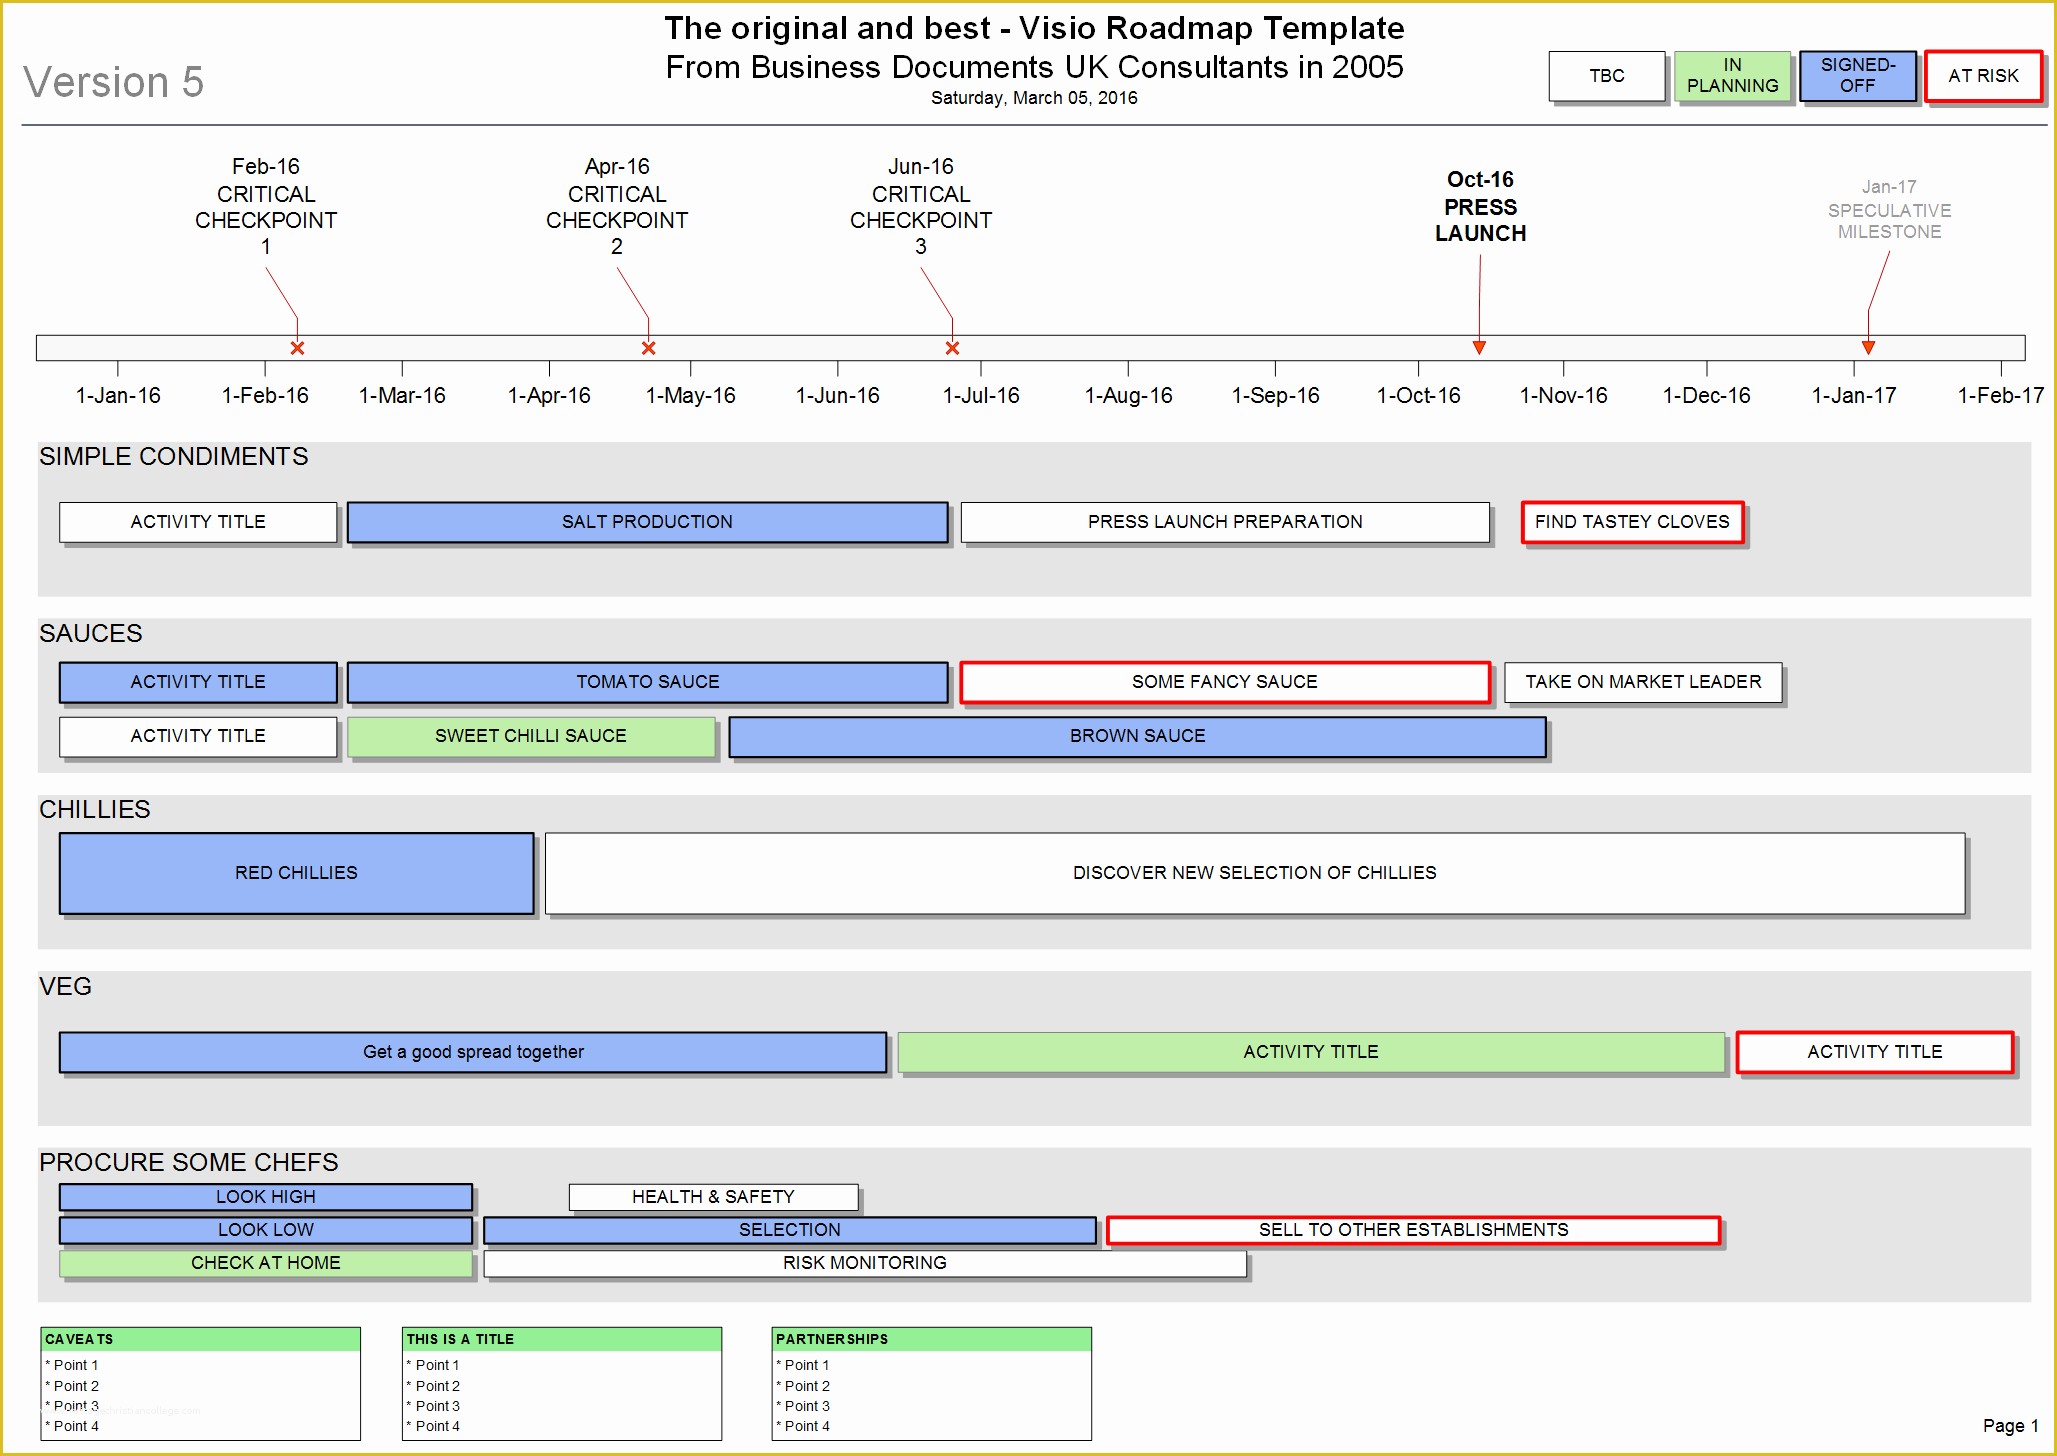 Free Roadmap Timeline Template Of Visio Roadmap Template the original & Best since 2005